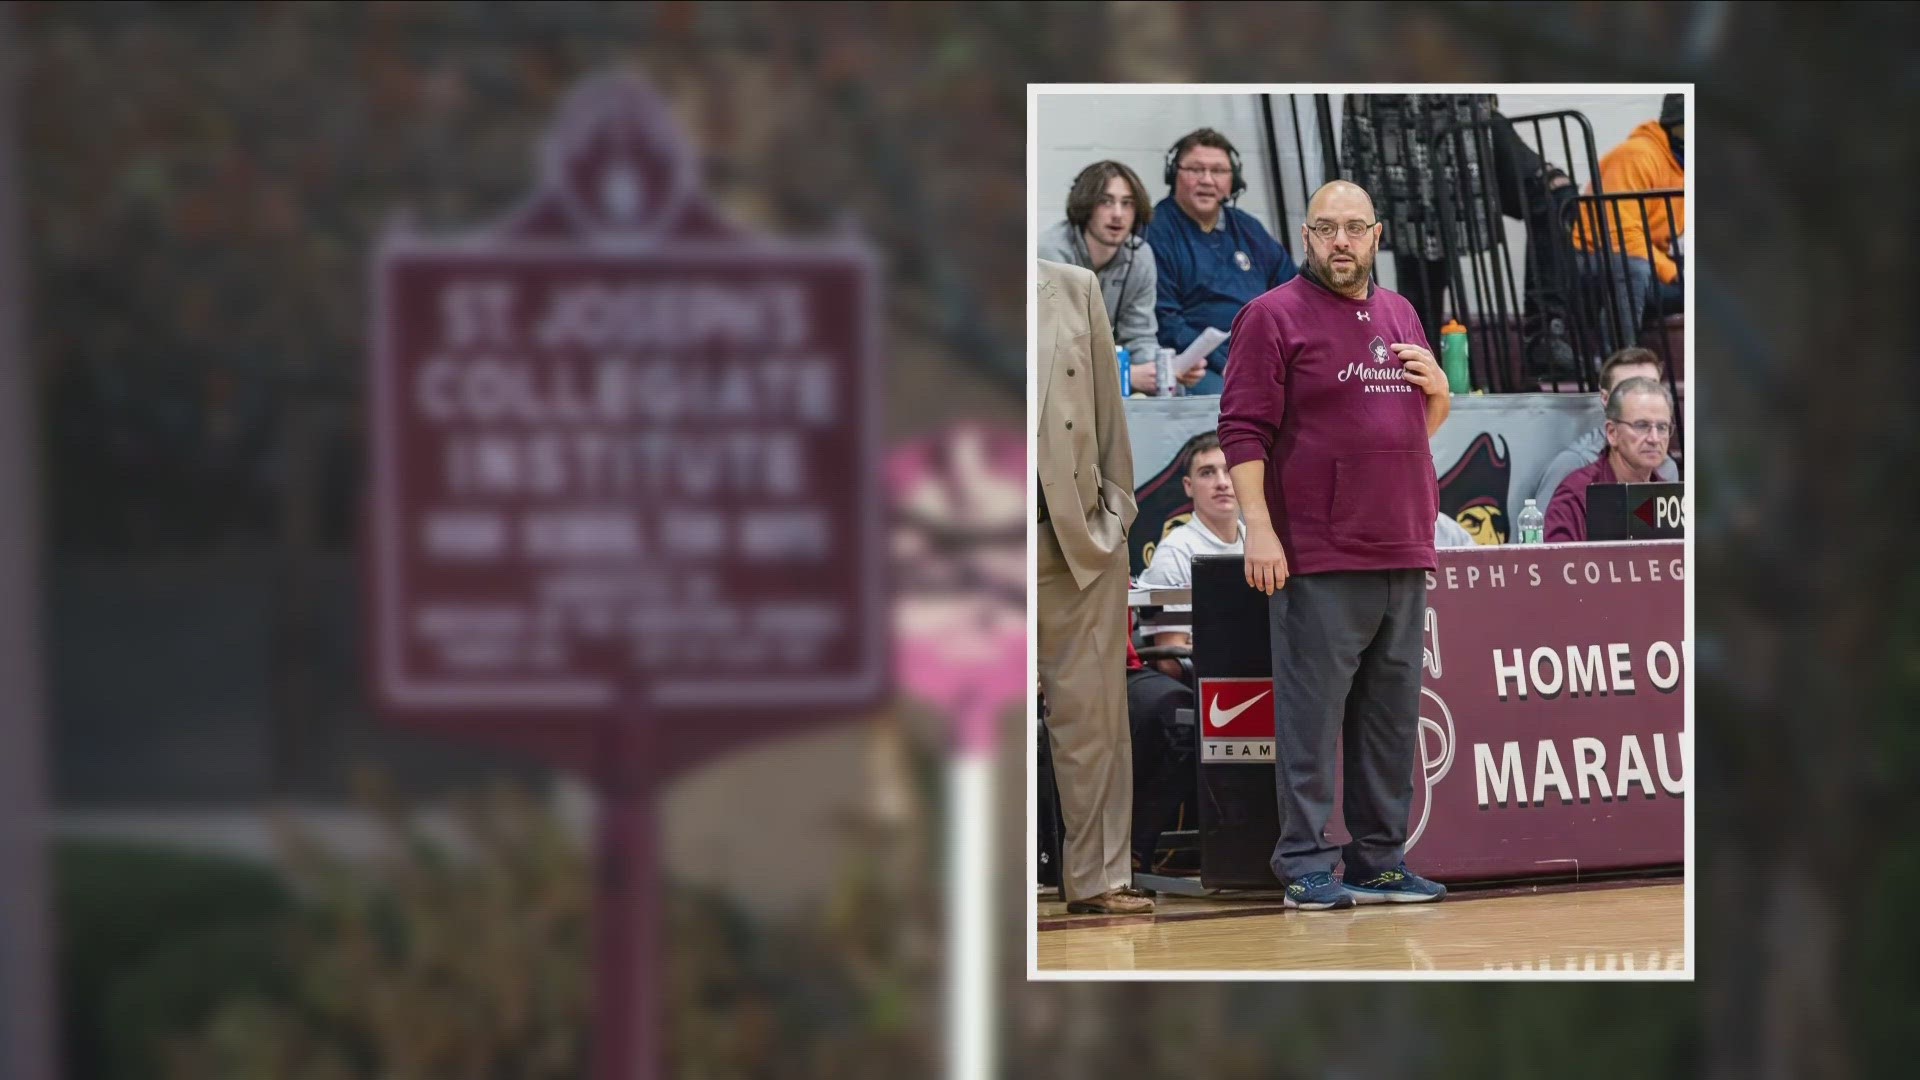 Gabe Michael, the varsity basketball coach at St Joes has died